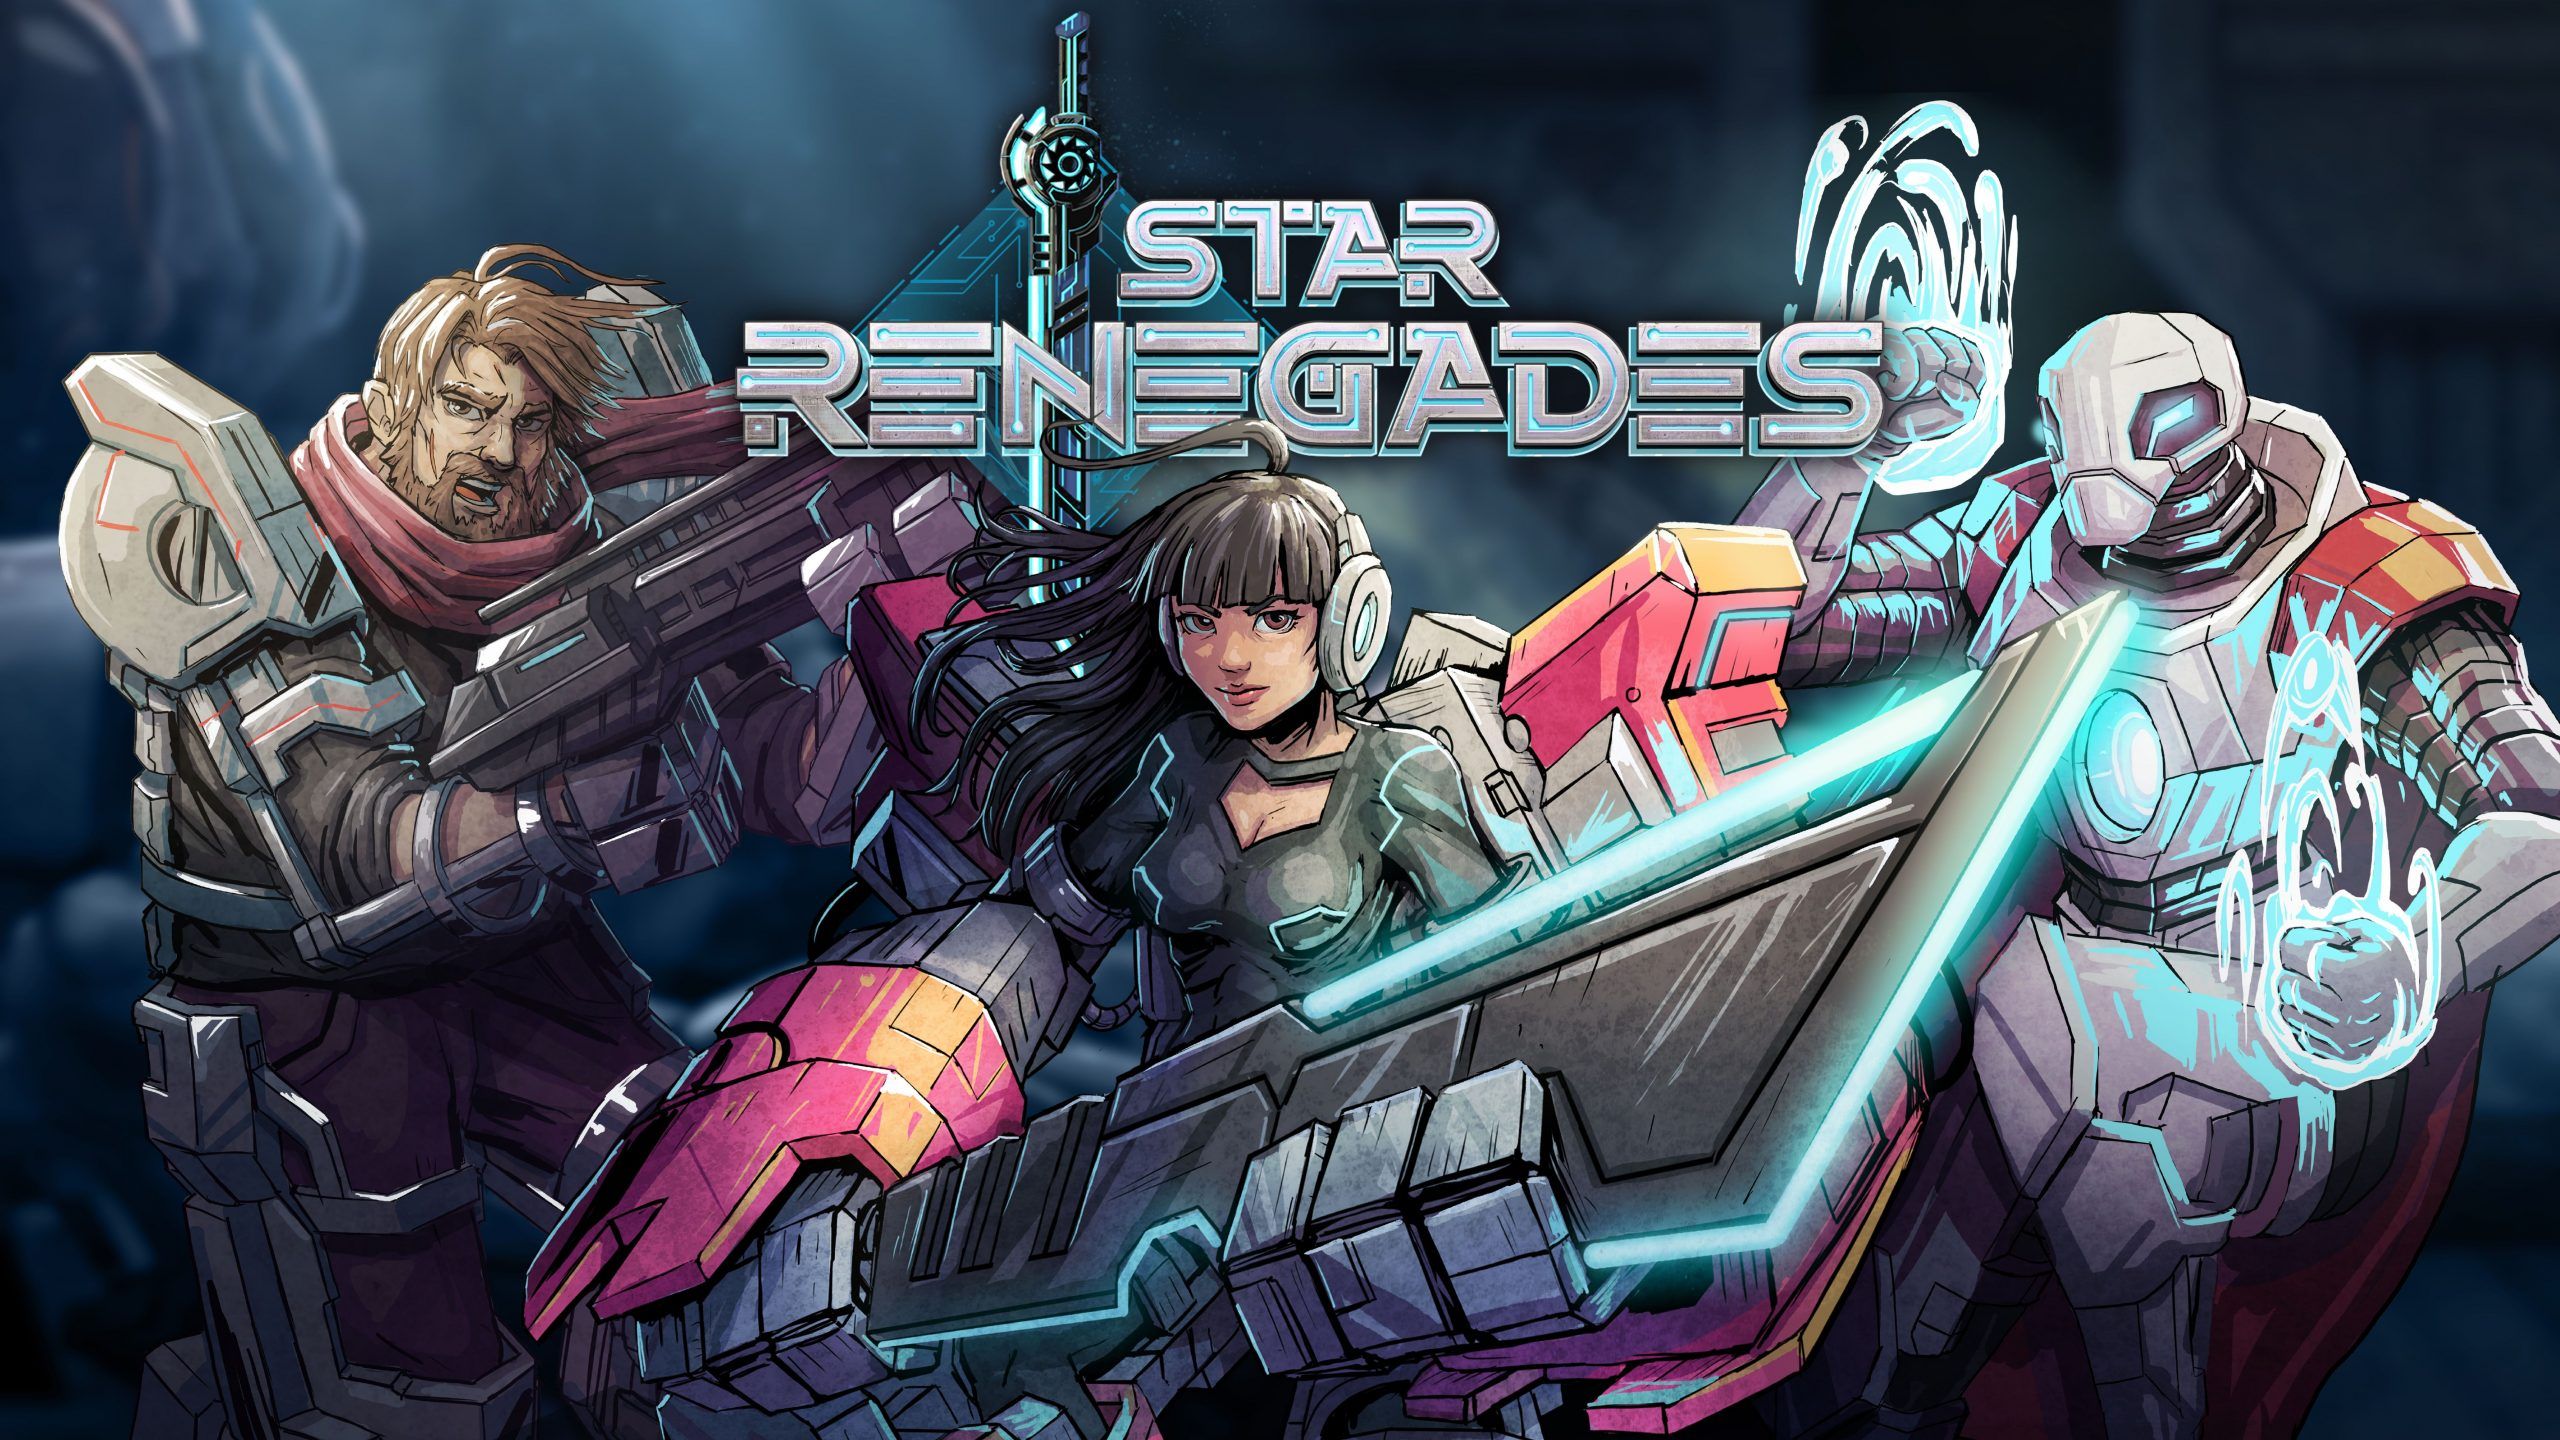 Star Renegades Preview